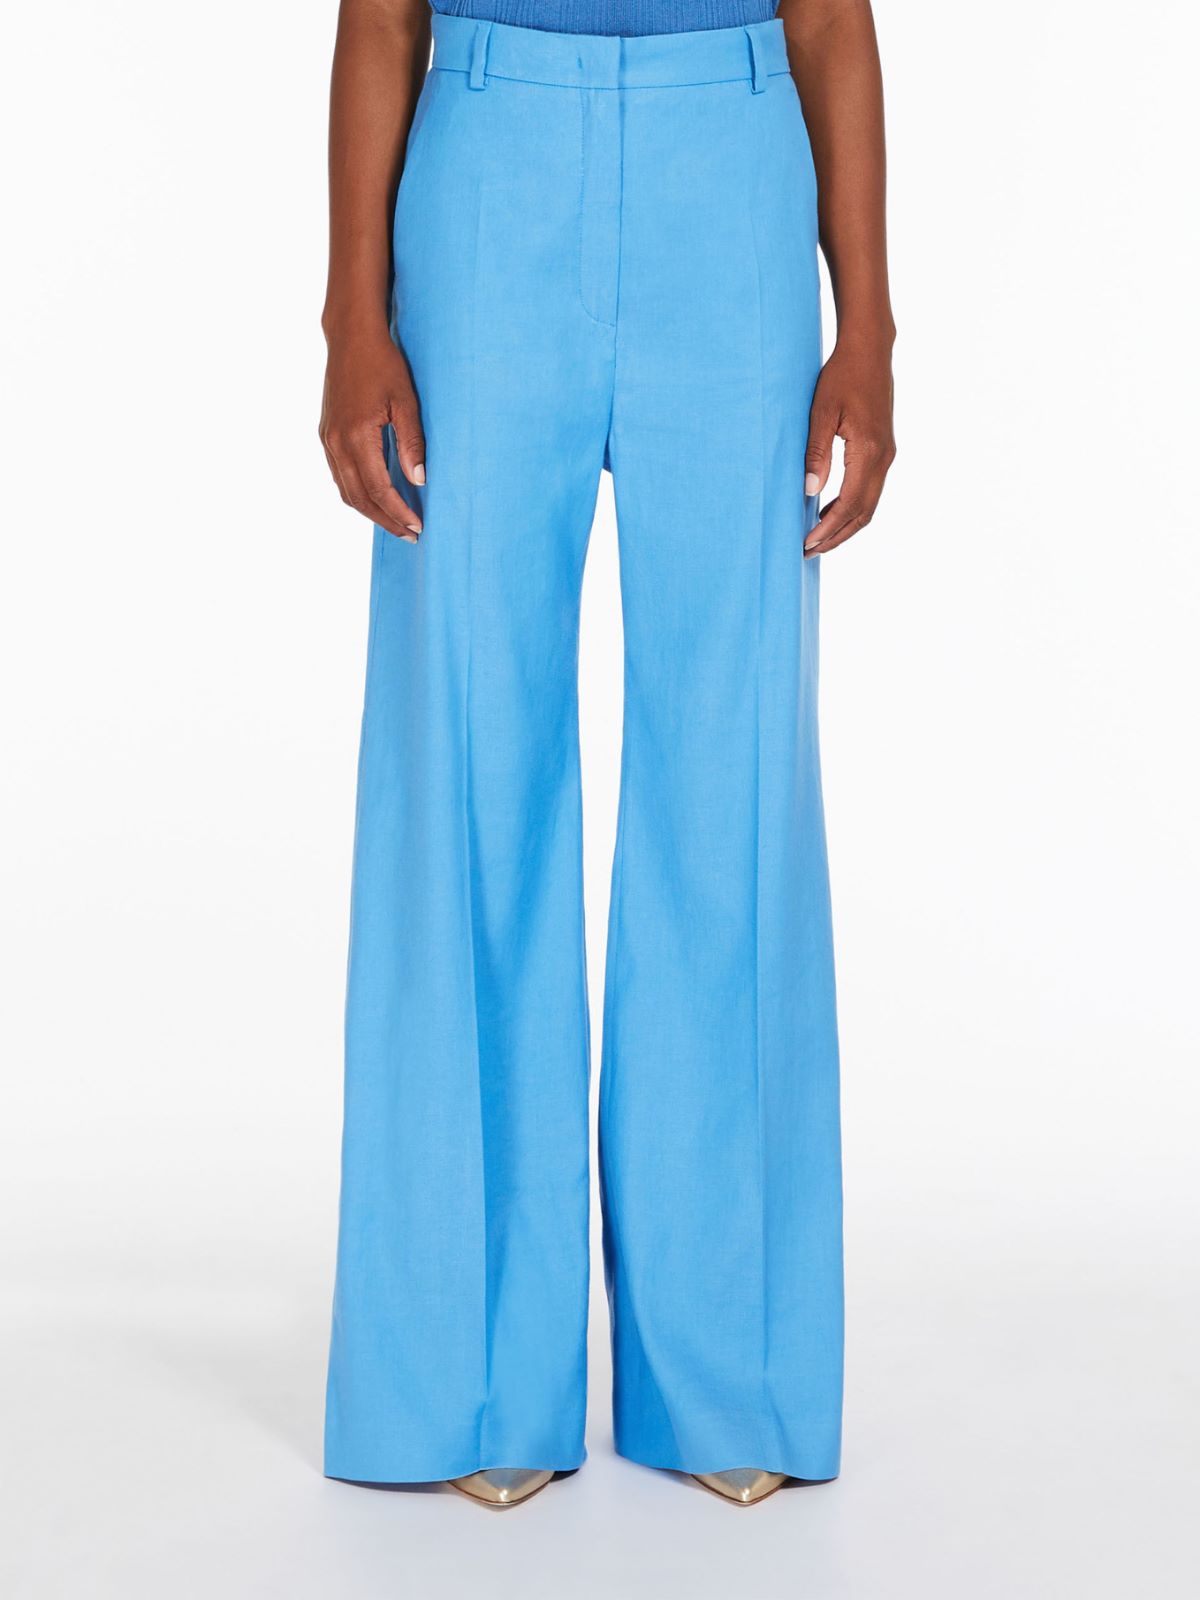 Max Mara Blue linen and cotton trousers